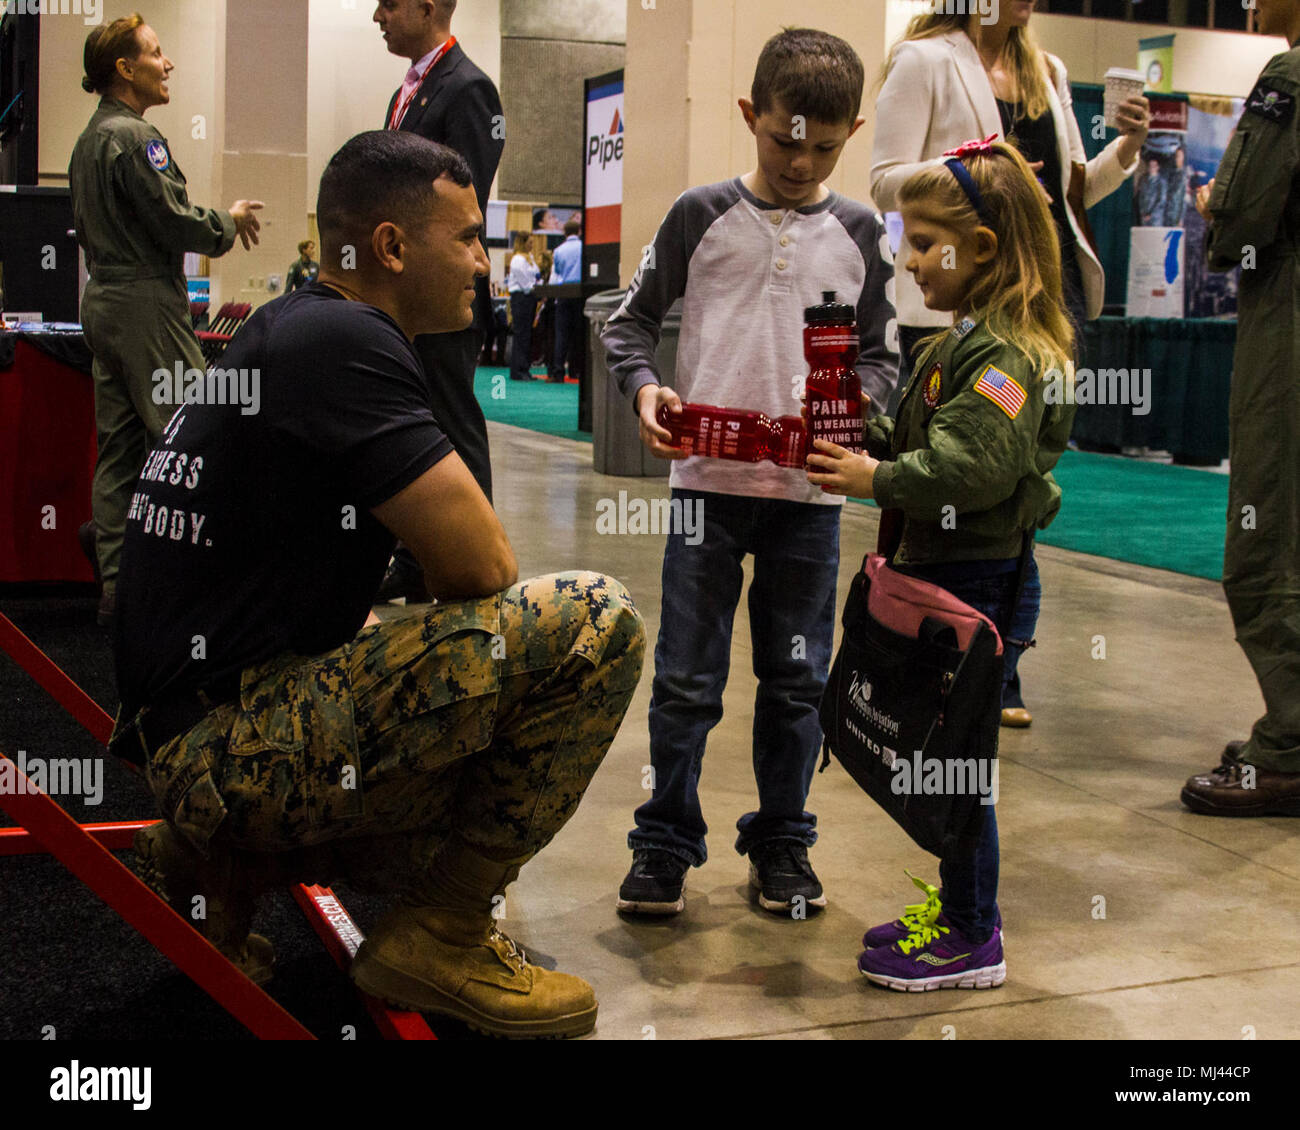 RENO, NV - 4-year-old Laren Brooks Leuschel and 6-year-old Gunner Leushchel from Greenville, South Carolina speak with Sgt. Angel Laracuente, a supply Marine for 12th Marine Corps District, at the Women in Aviation, International’s (WAI) 29th Annual Symposium in Reno, Nevada, March 23. Marines attended WAI to generate awareness for career opportunities in the Marine Corps while engaging with highly-qualified individuals and key influencers. The WAI’s 29th symposium falls on the 100 year anniversary of female service in the United States Marine Corps, a milestone celebrated by female aviators a Stock Photo